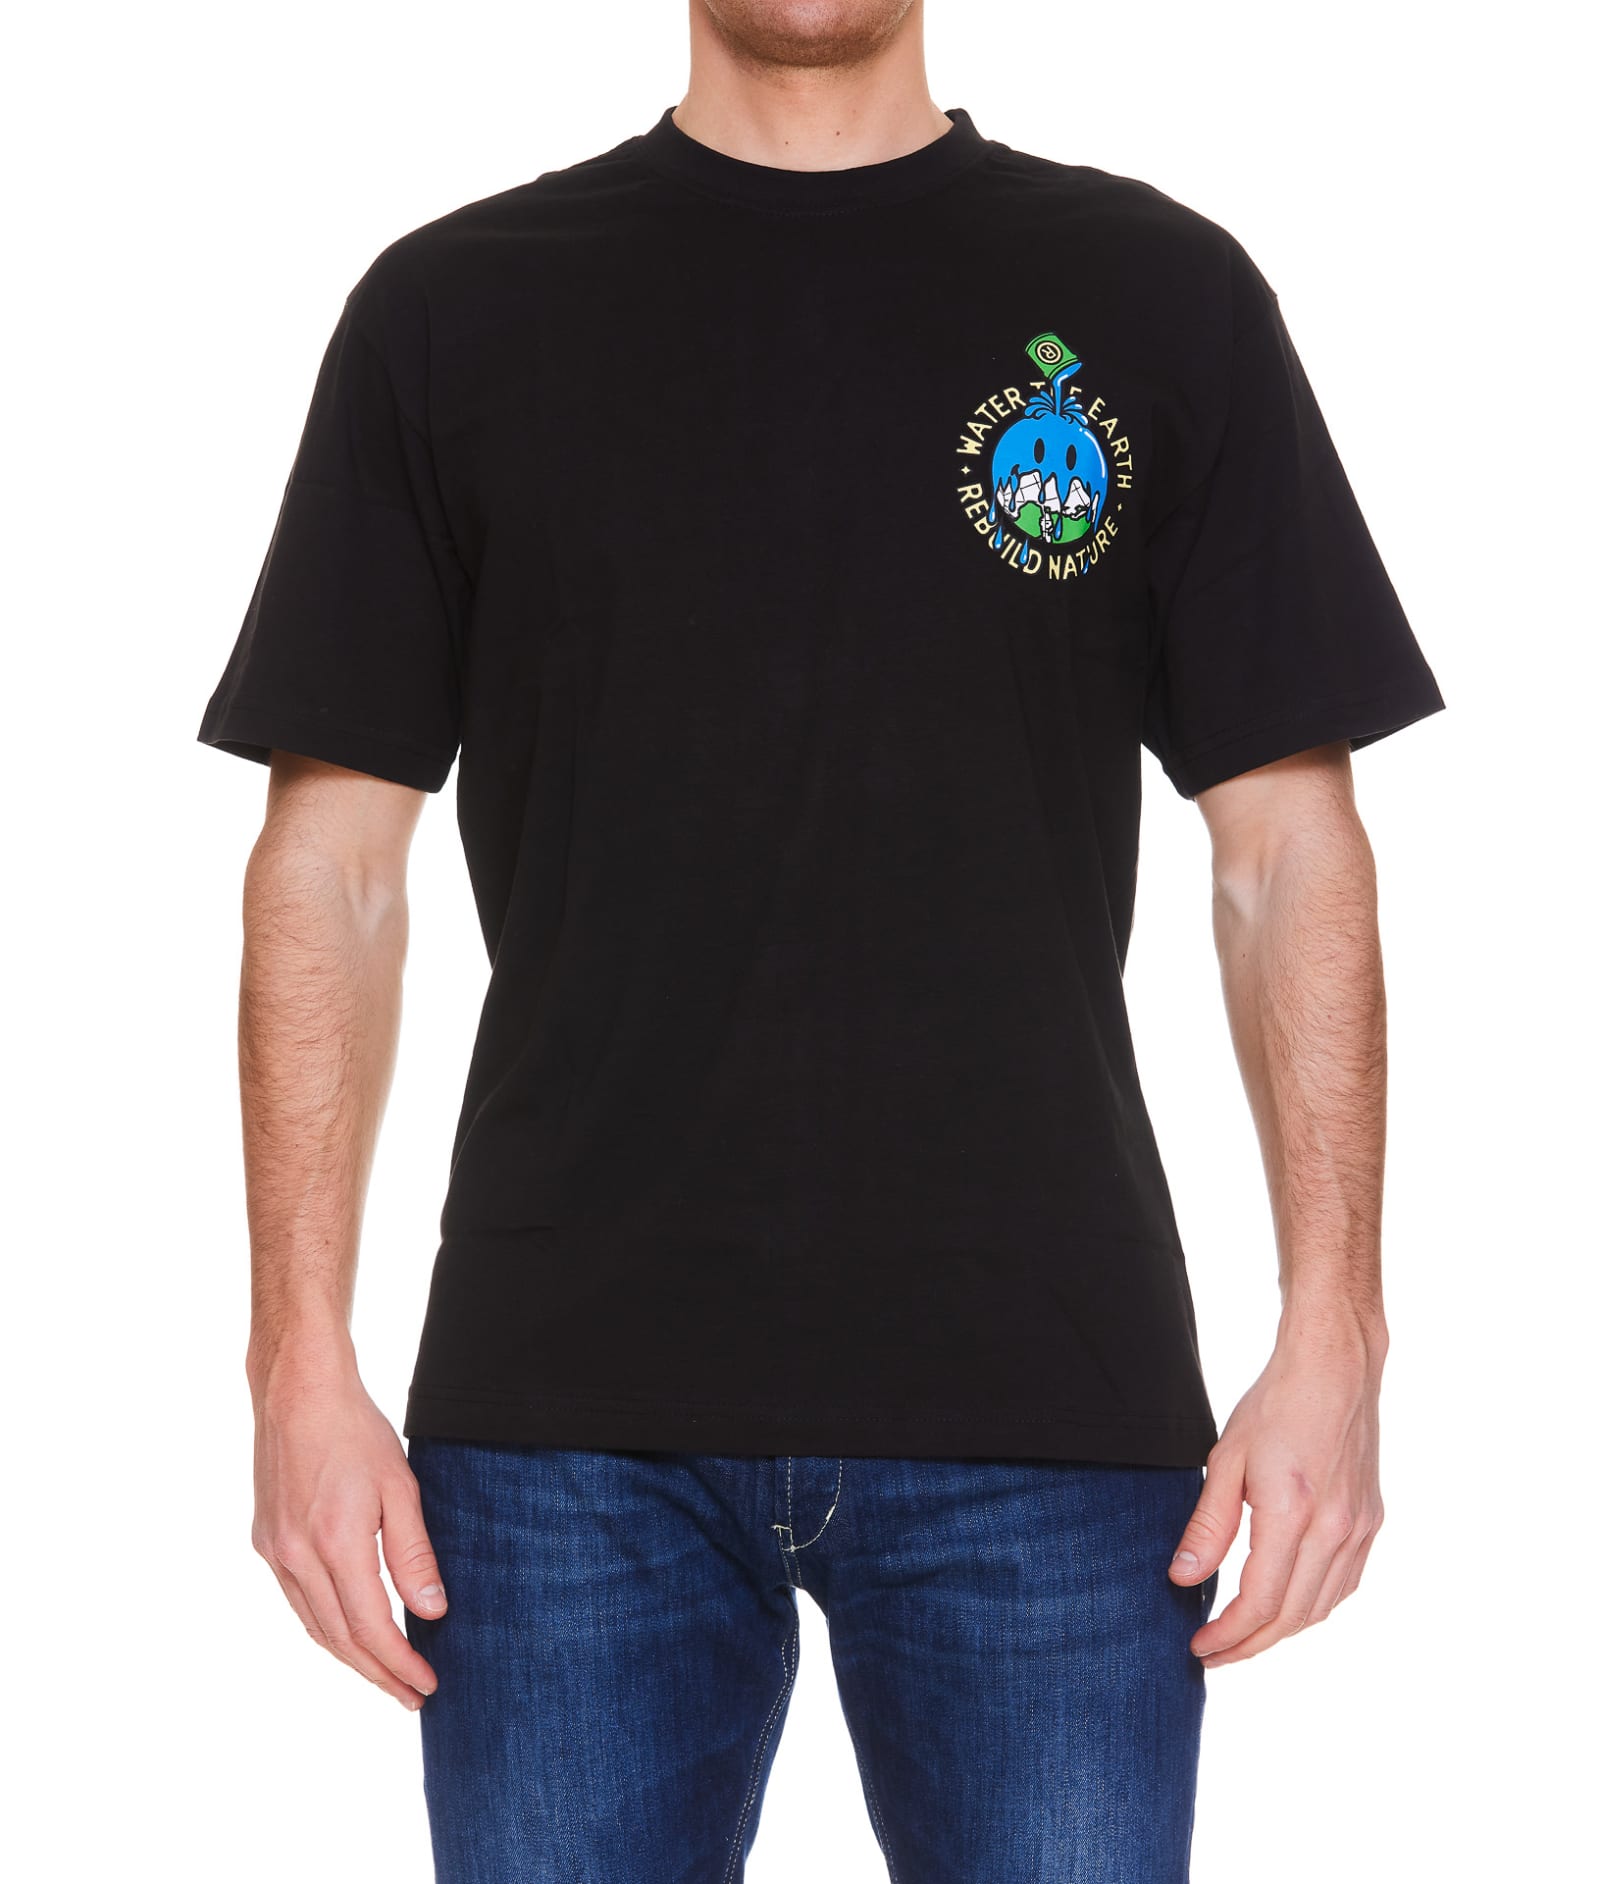 Market Water The Planet T-shirt